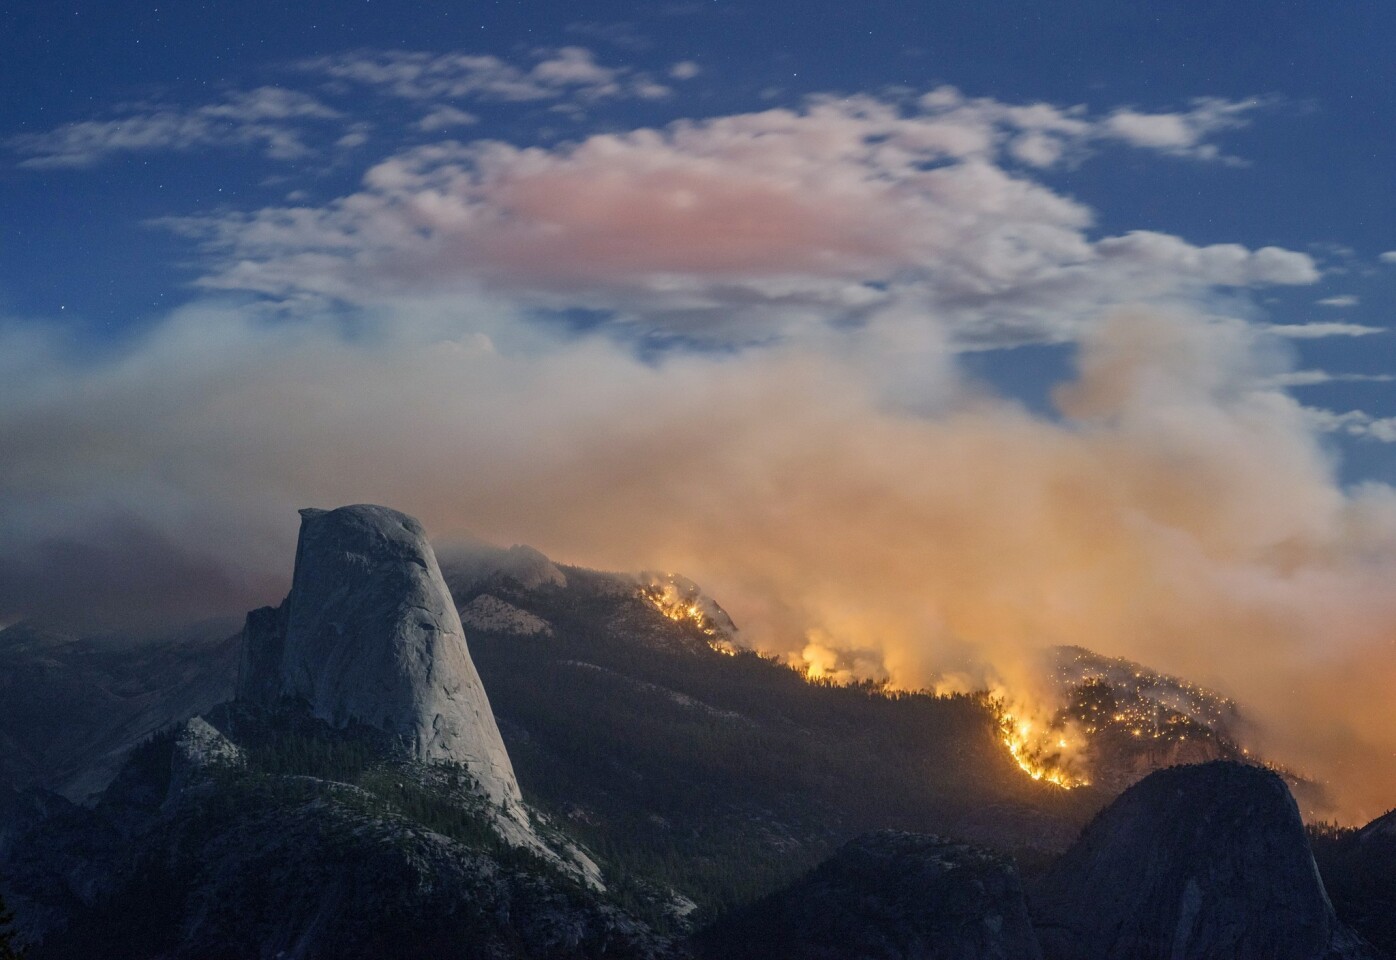 A wildfire burns next to Half Dome in Yosemite National Park.